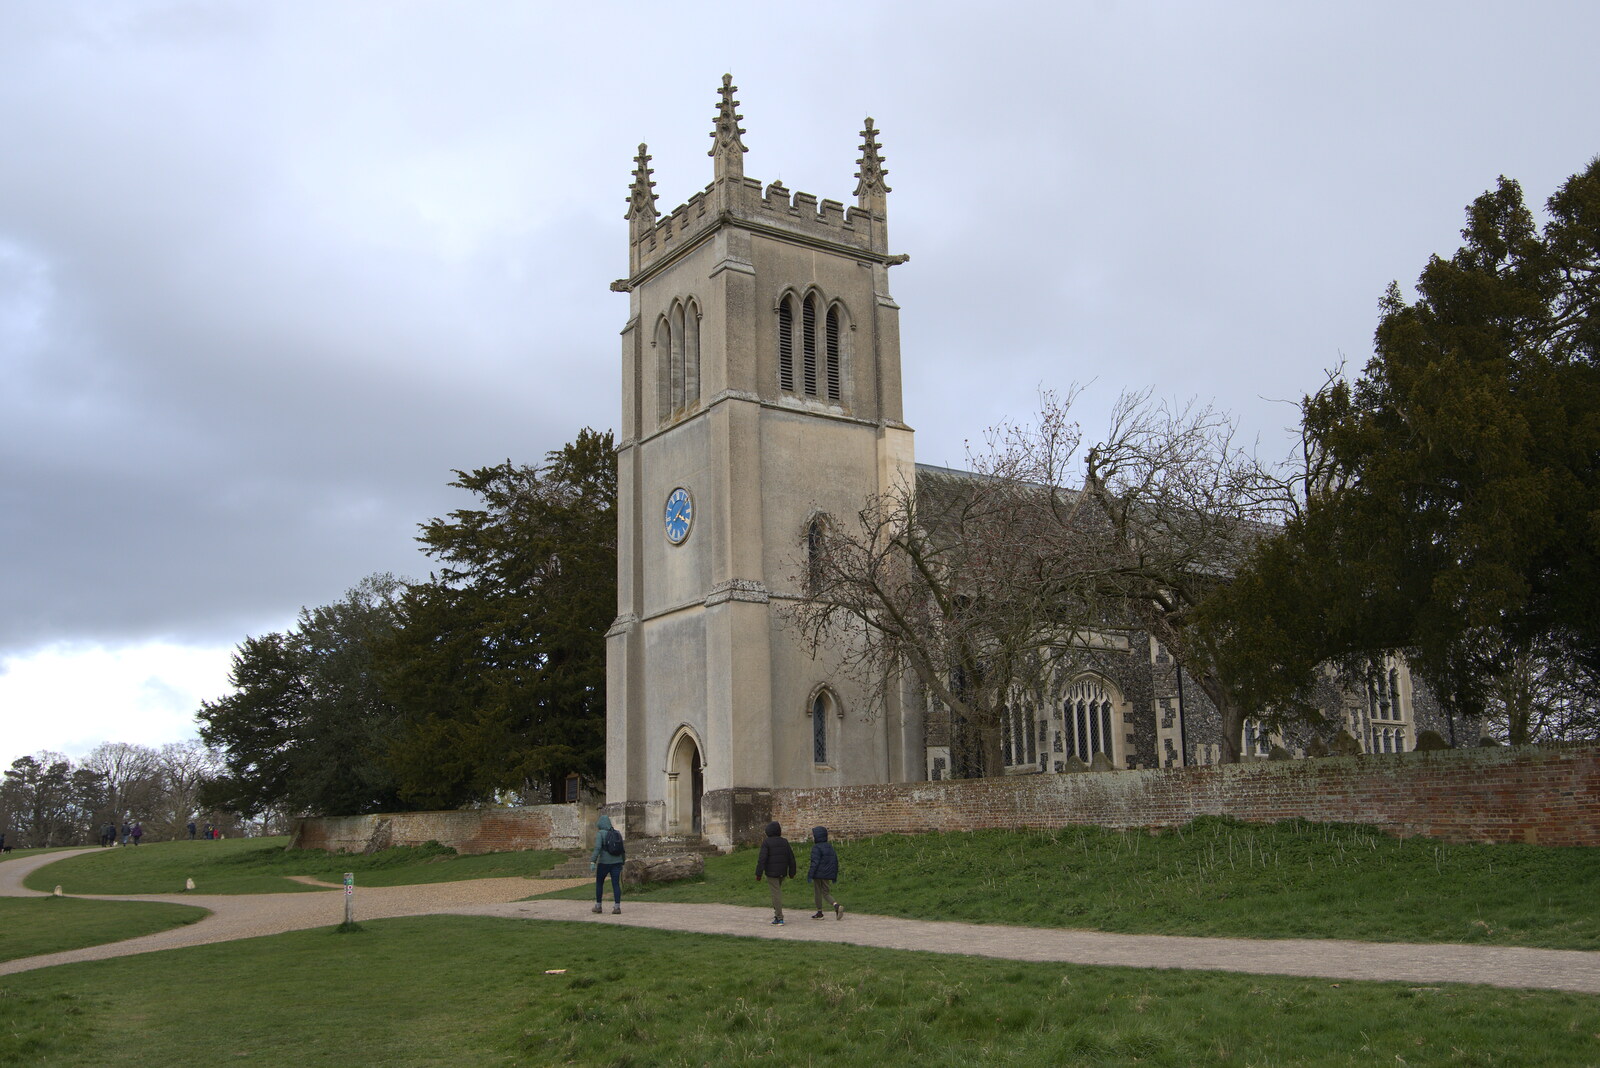 Back at Ickworth Church from A Return to Ickworth House, Horringer, Suffolk - 11th April 2021